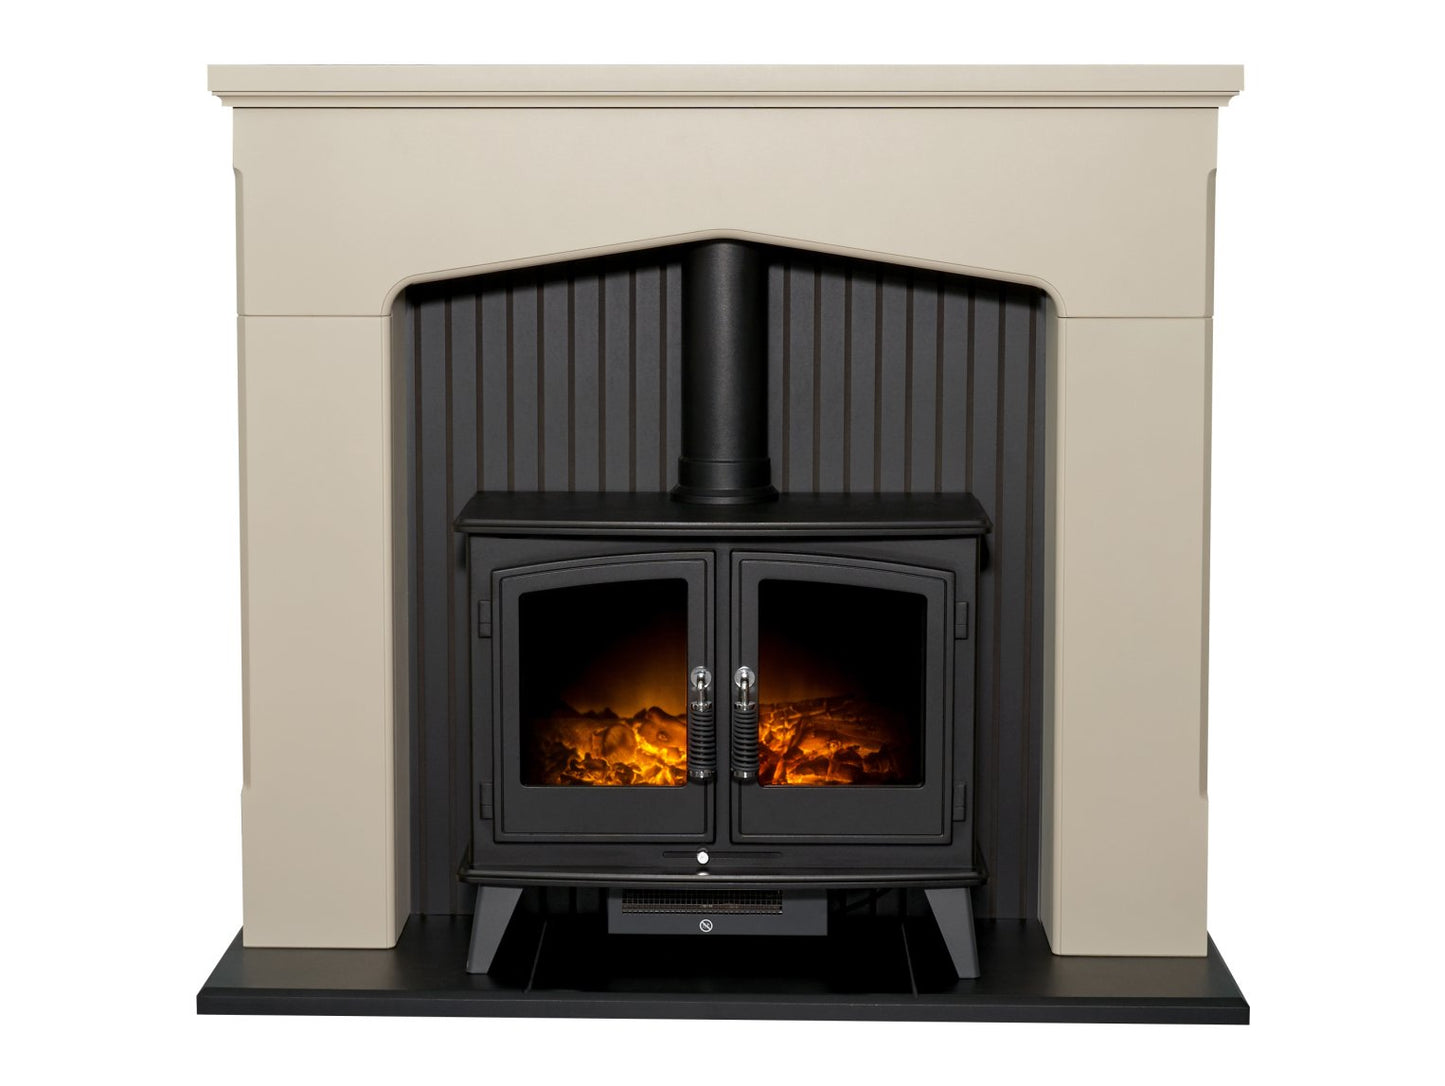 Adam Ludlow Stove Fireplace in Stone Effect with Woodhouse Electric Stove in Black, 48 Inch